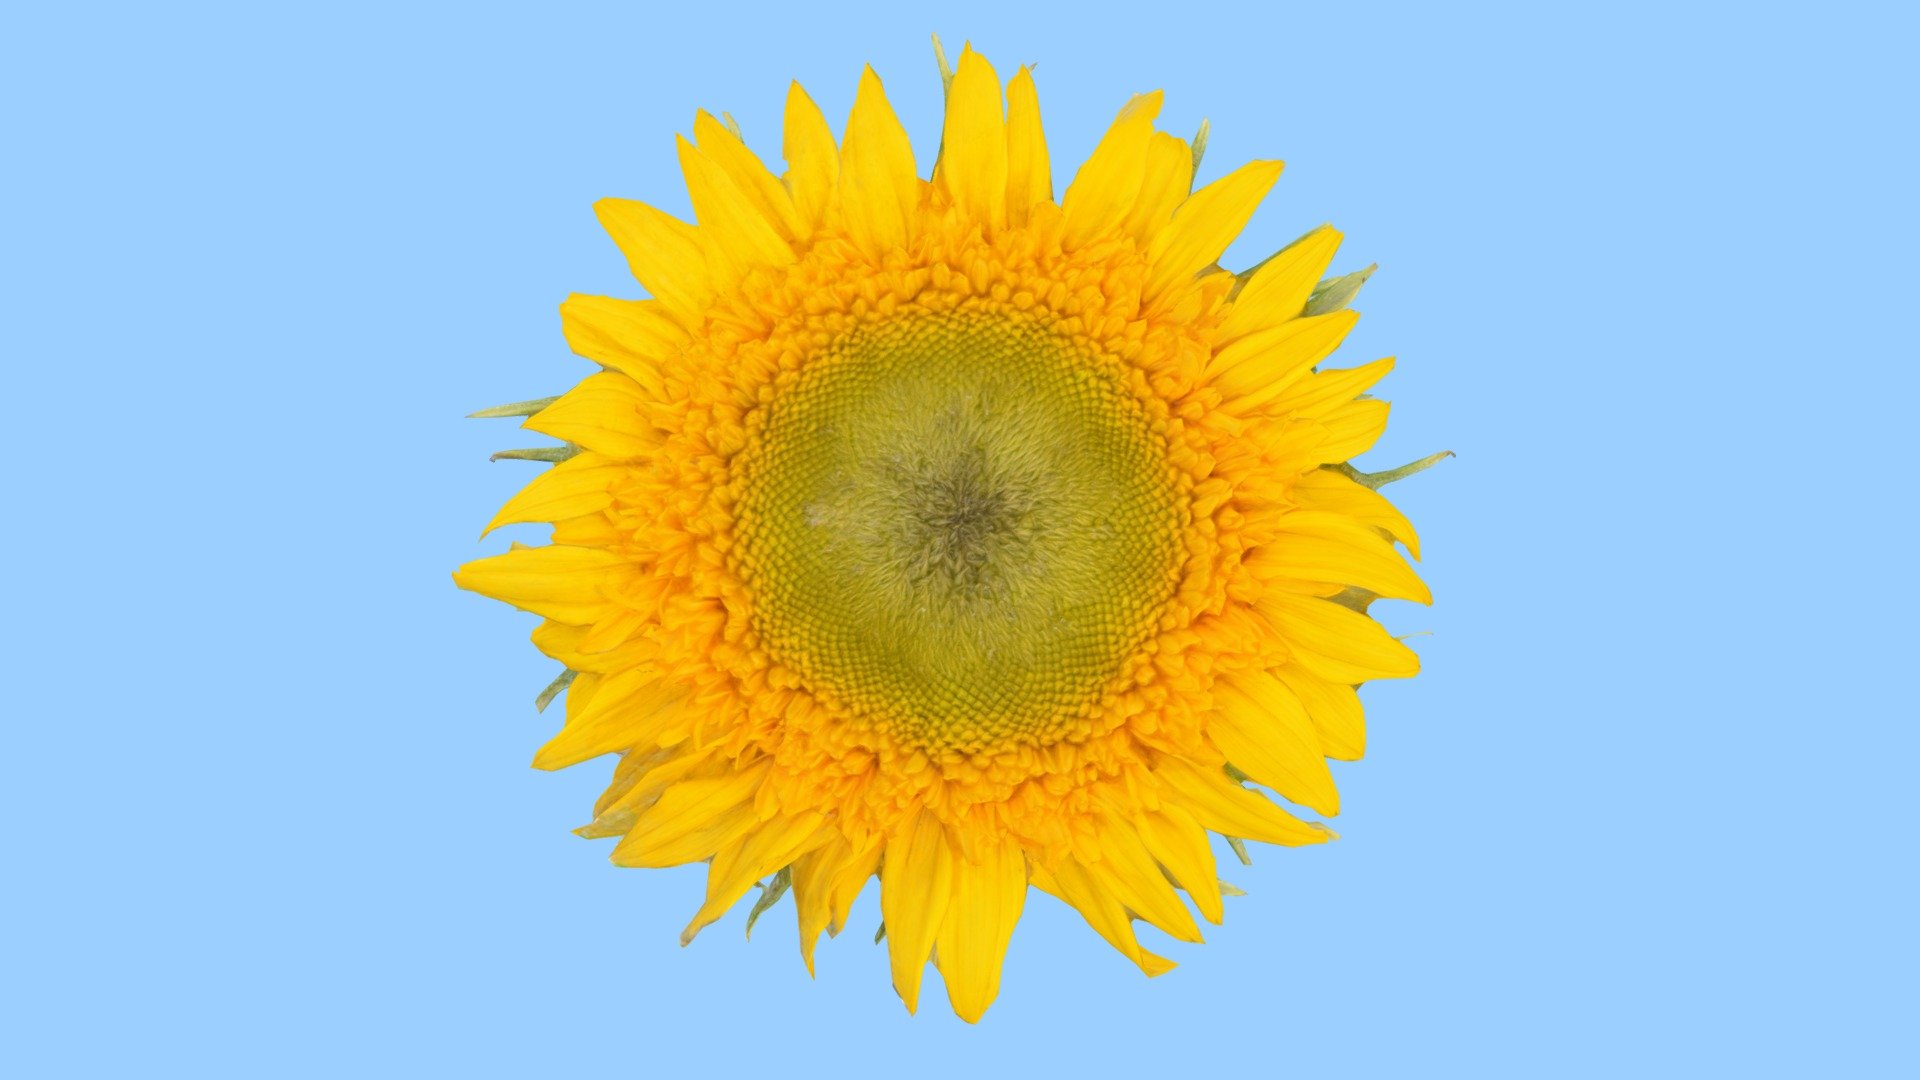 Sunflower, the national flower of Ukraine. Free download: If you turn this sunflower into art for Ukraine, feel free to put a link in the comments 3d model